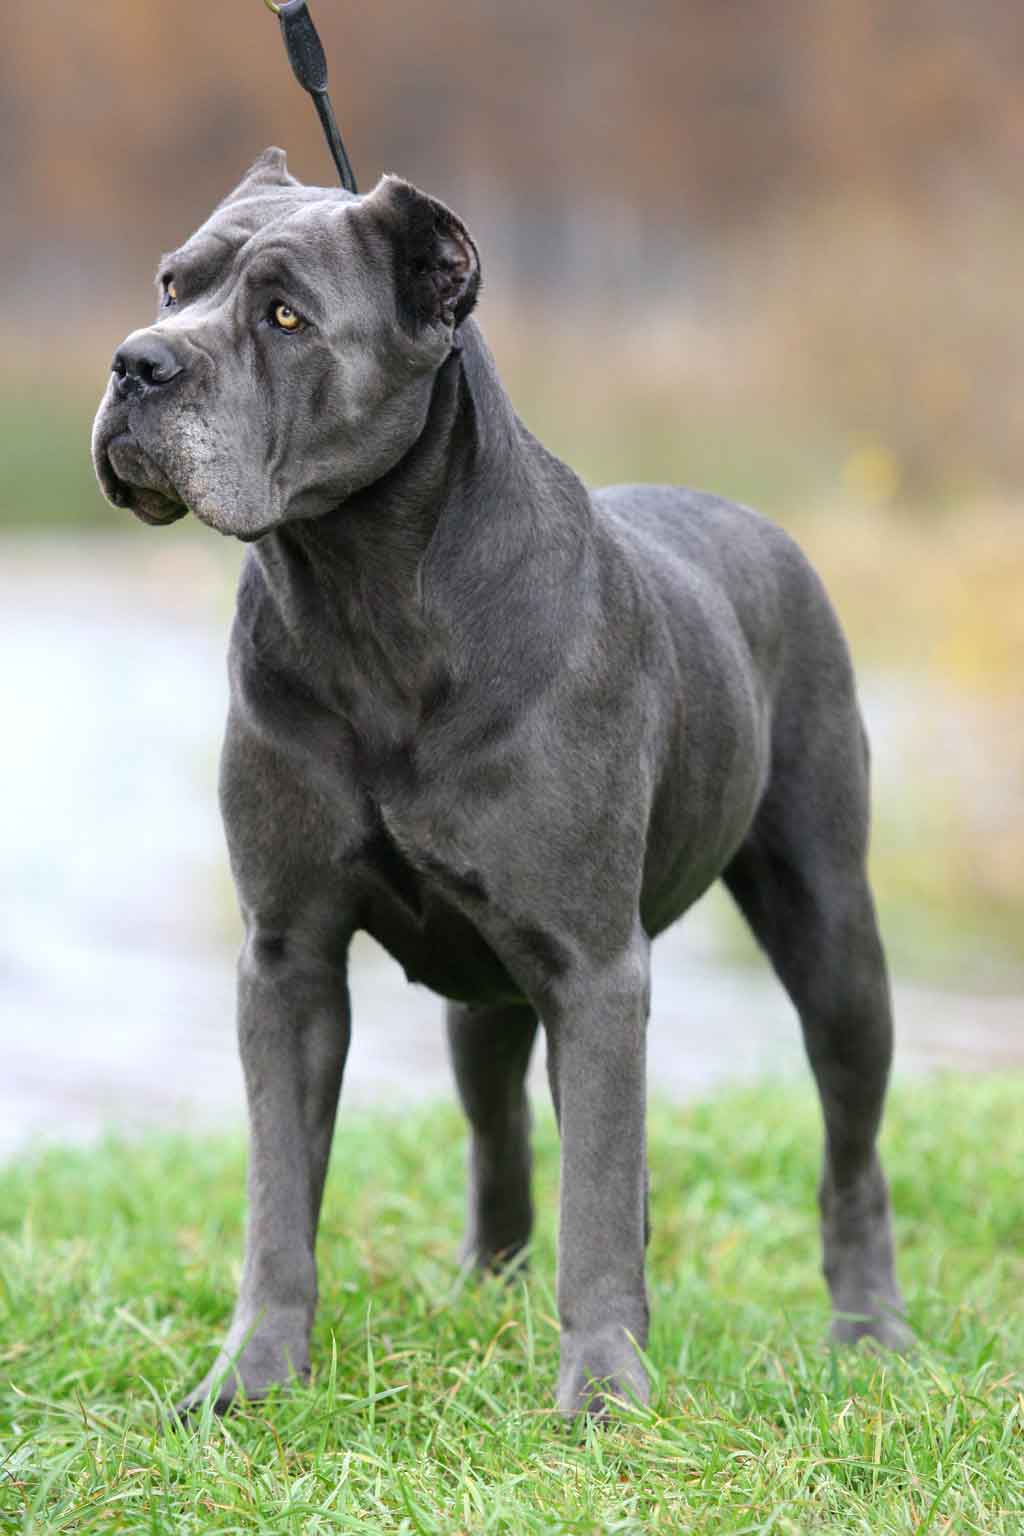 Cane Corso Wallpapers High Quality | Download Free